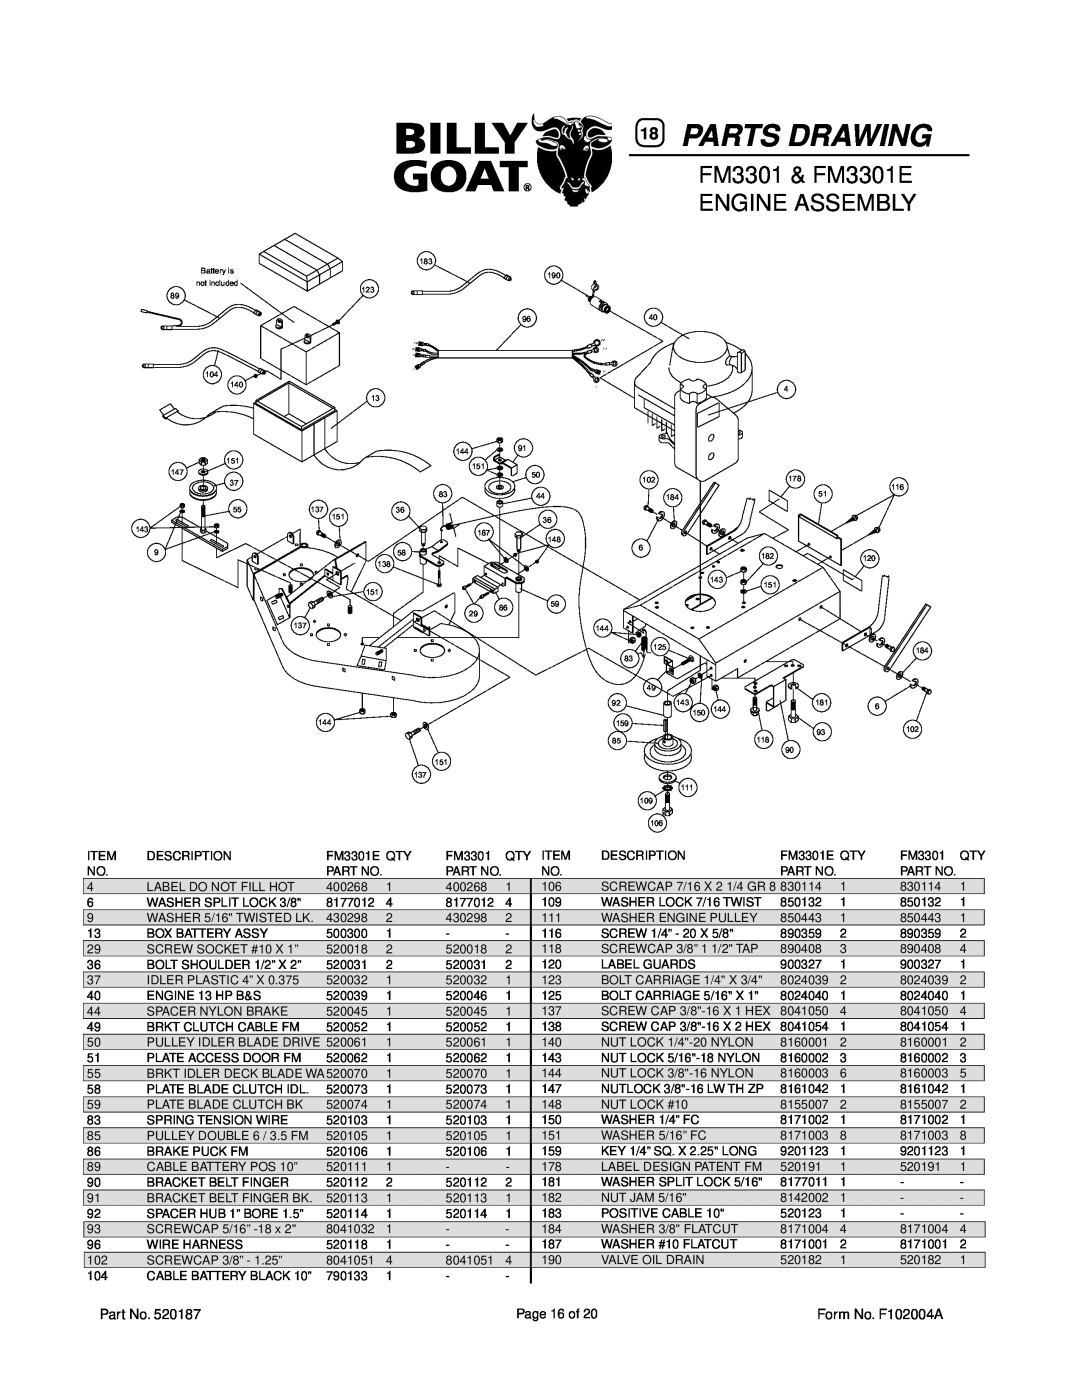 Billy Goat owner manual FM3301 & FM3301E ENGINE ASSEMBLY, Parts Drawing 